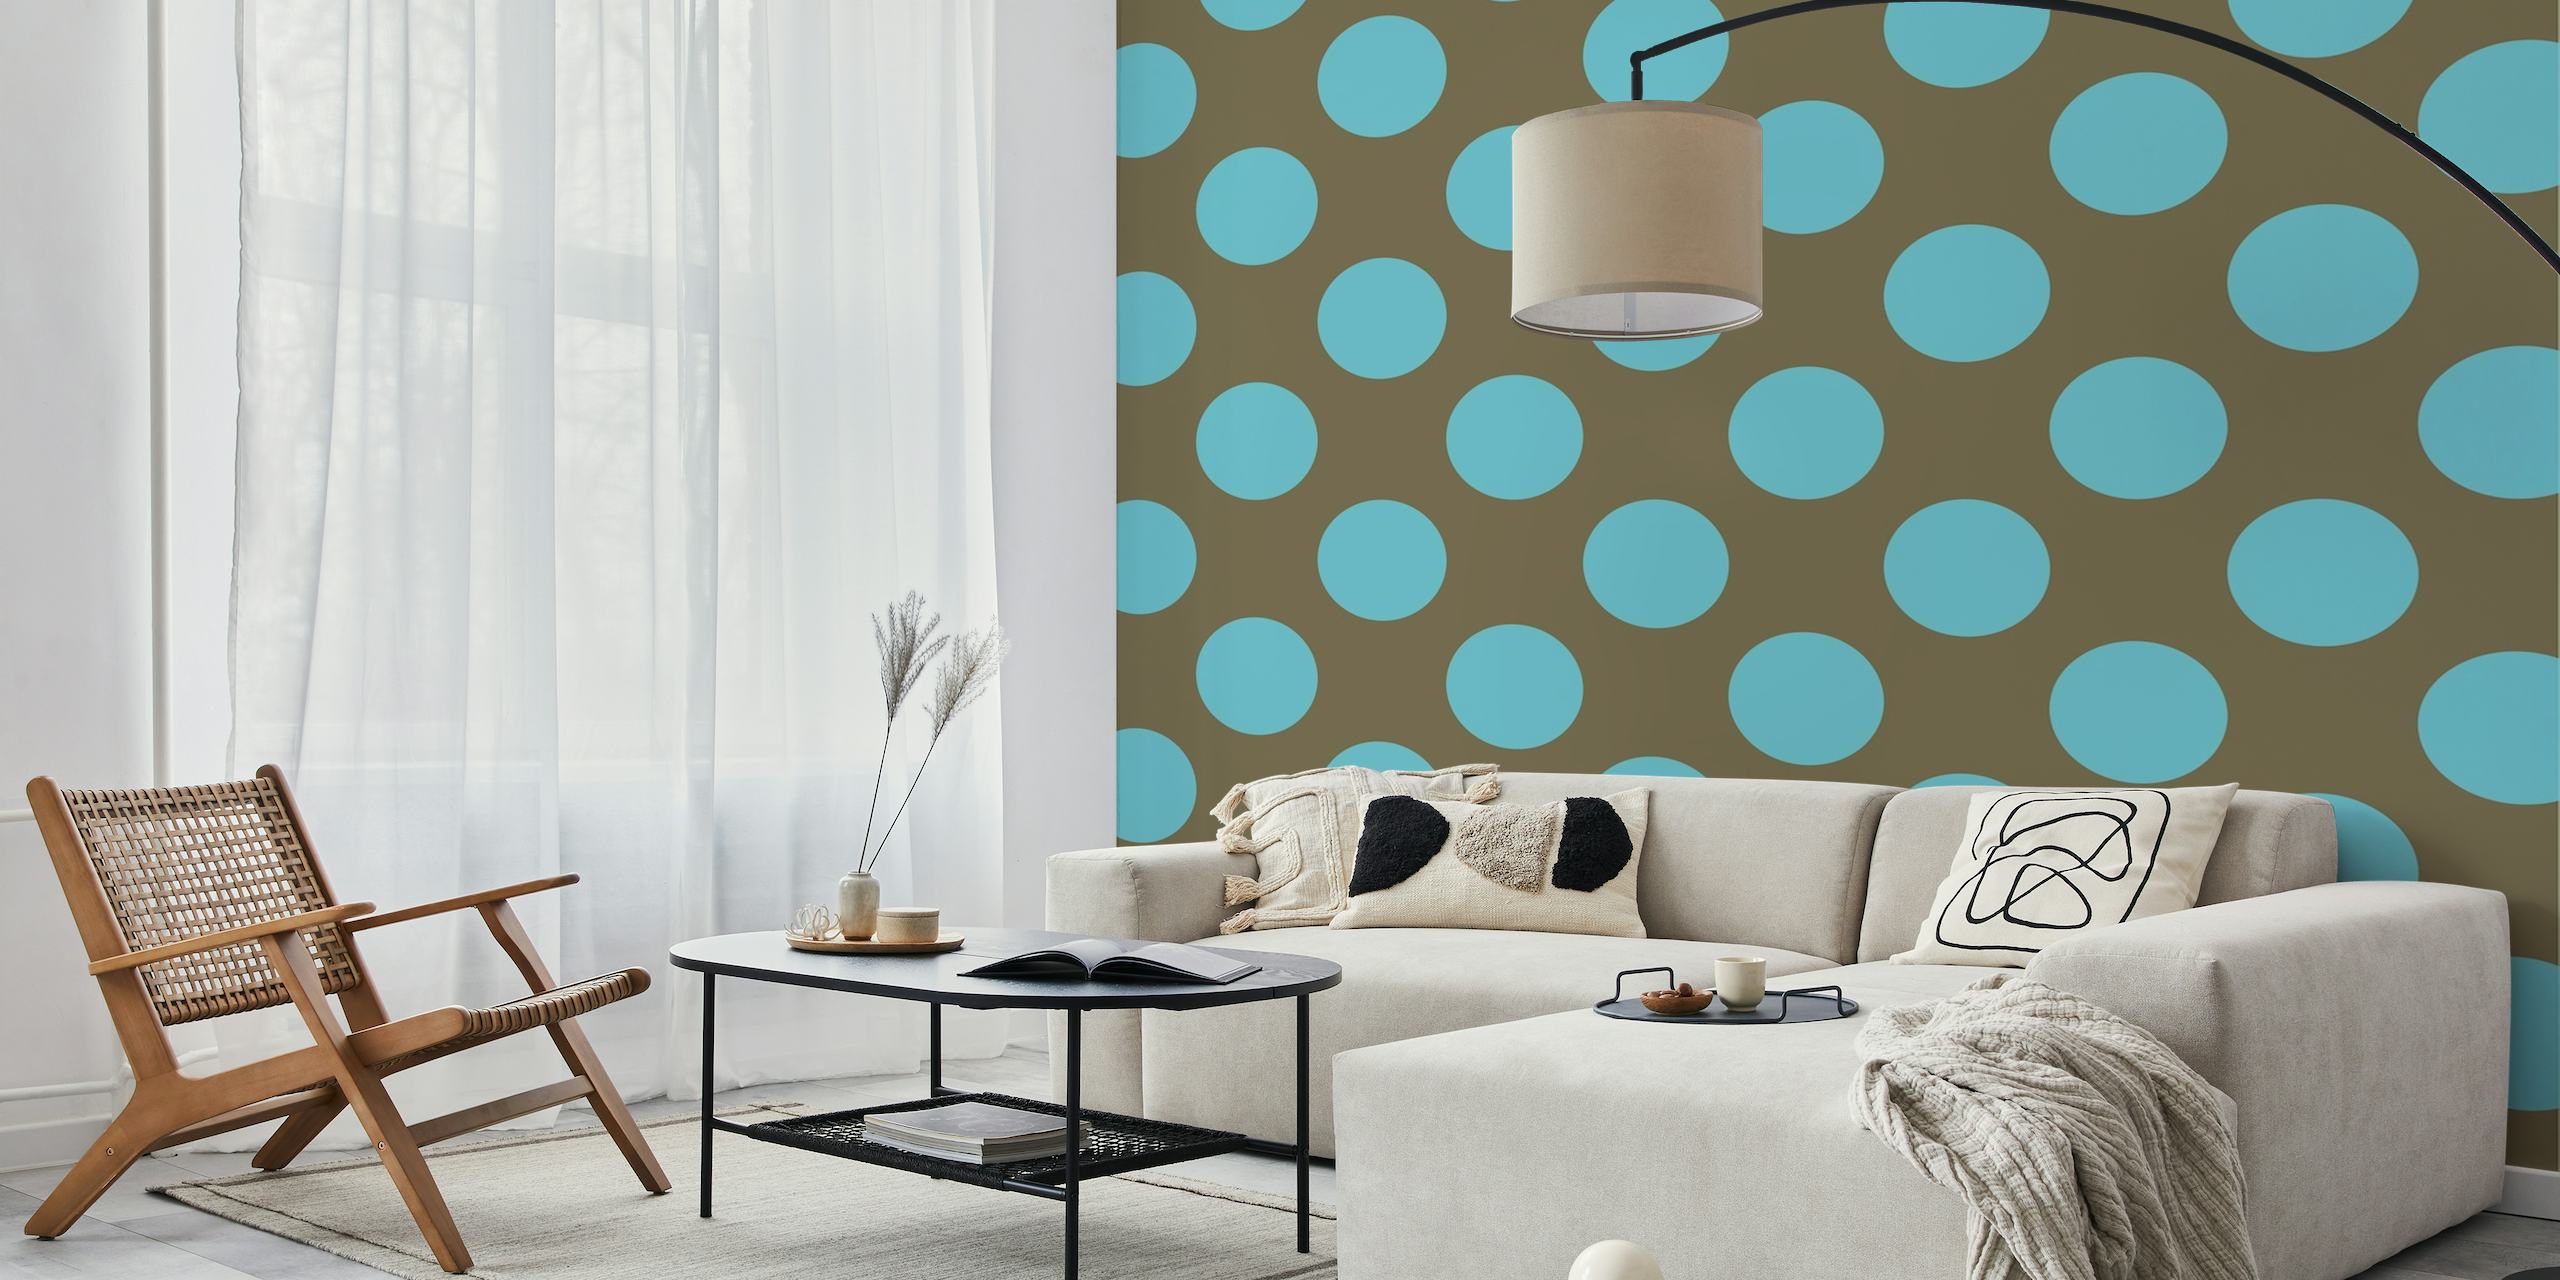 Brown Turquoise polka dotted art ταπετσαρία